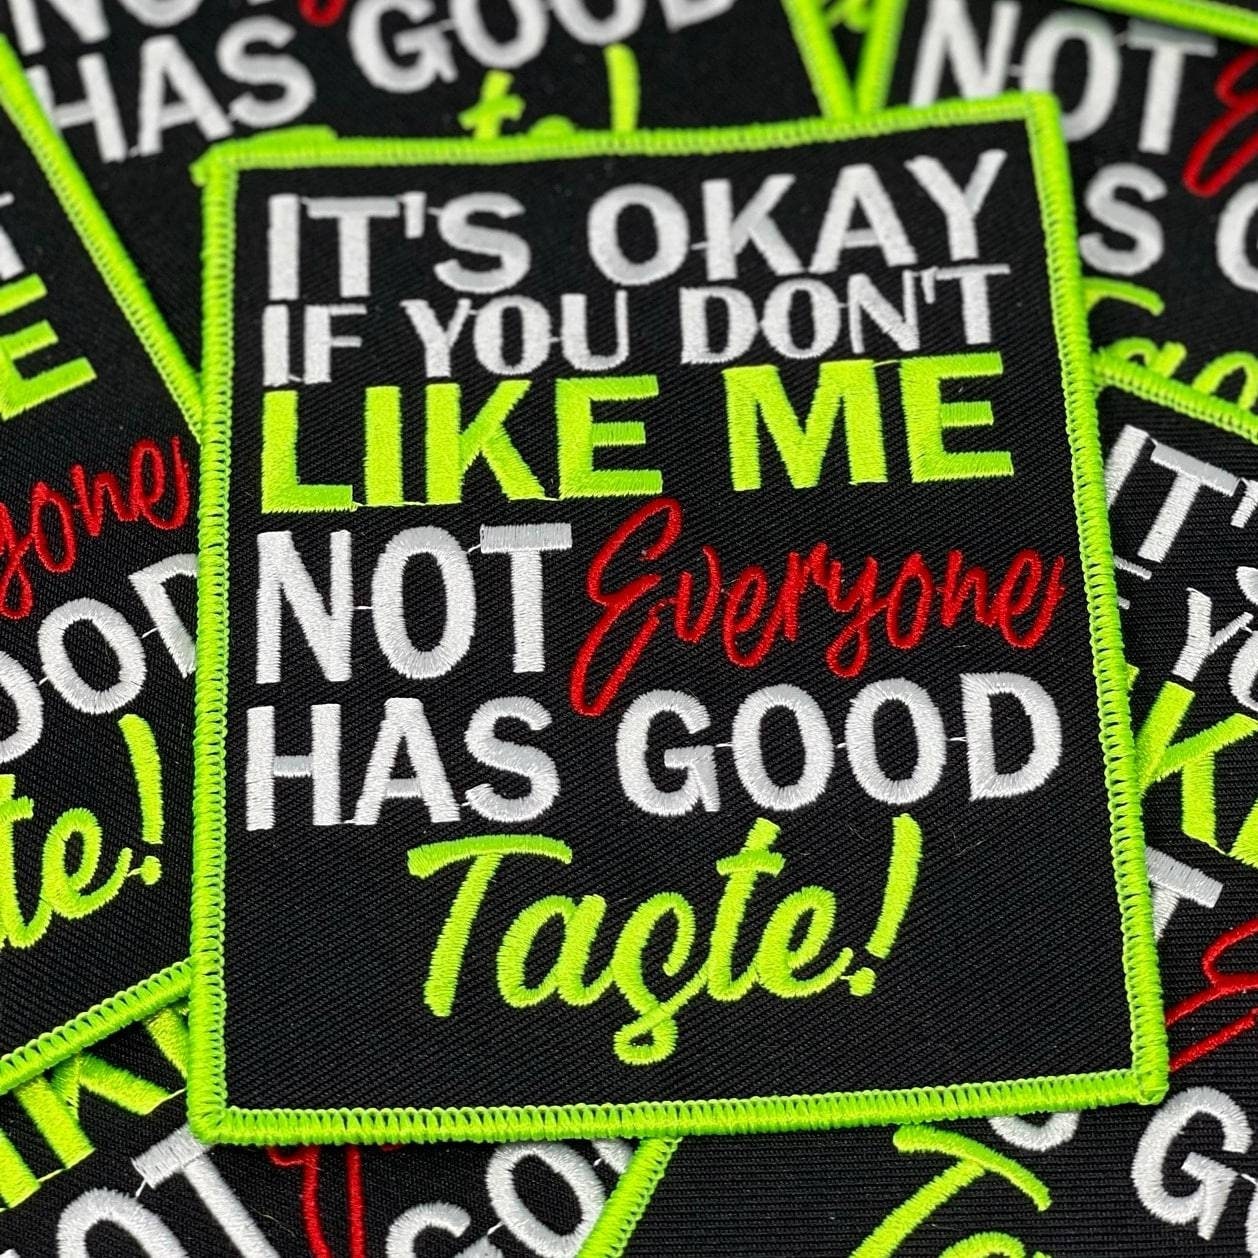 New Arrival,"Not Everyone Has Good Taste!" 1-pc, Funny Embroidered Patch, Neon Green Border, Size 5"x4" Iron-on, DIY Craft Supplies